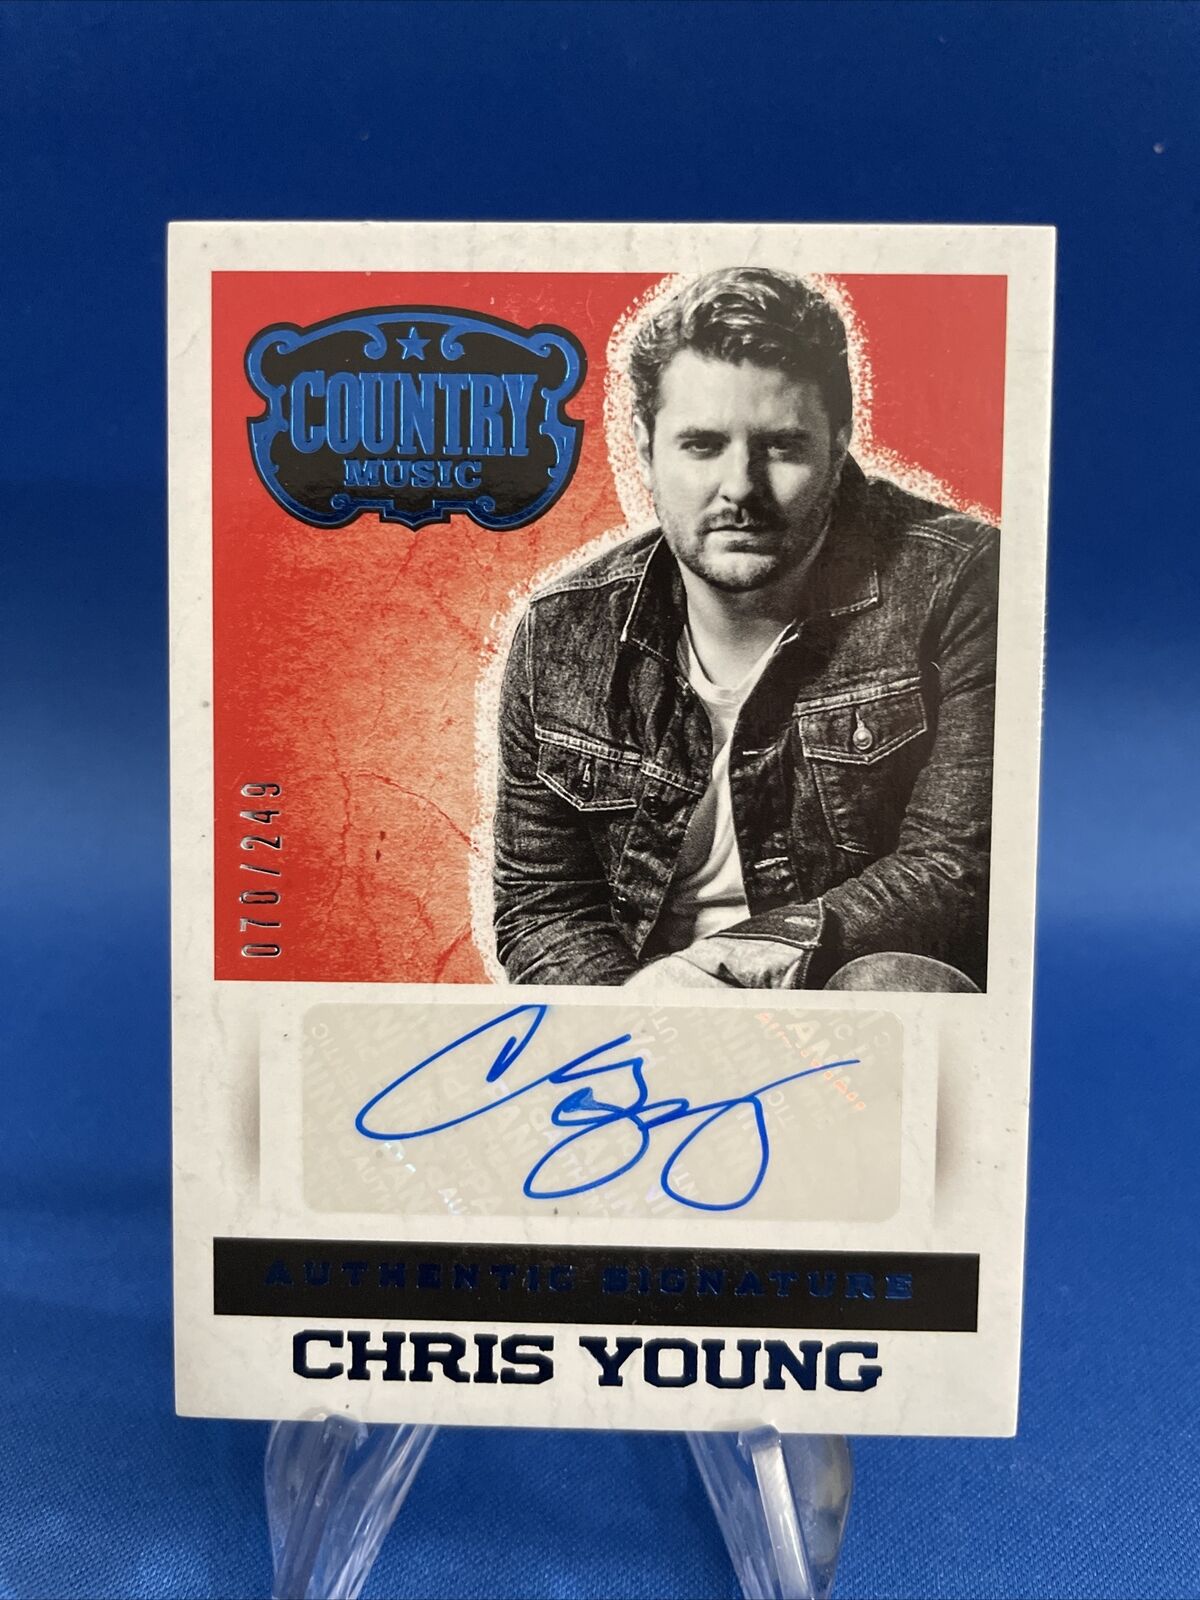 2014 panini country music Chris Young autograph /249